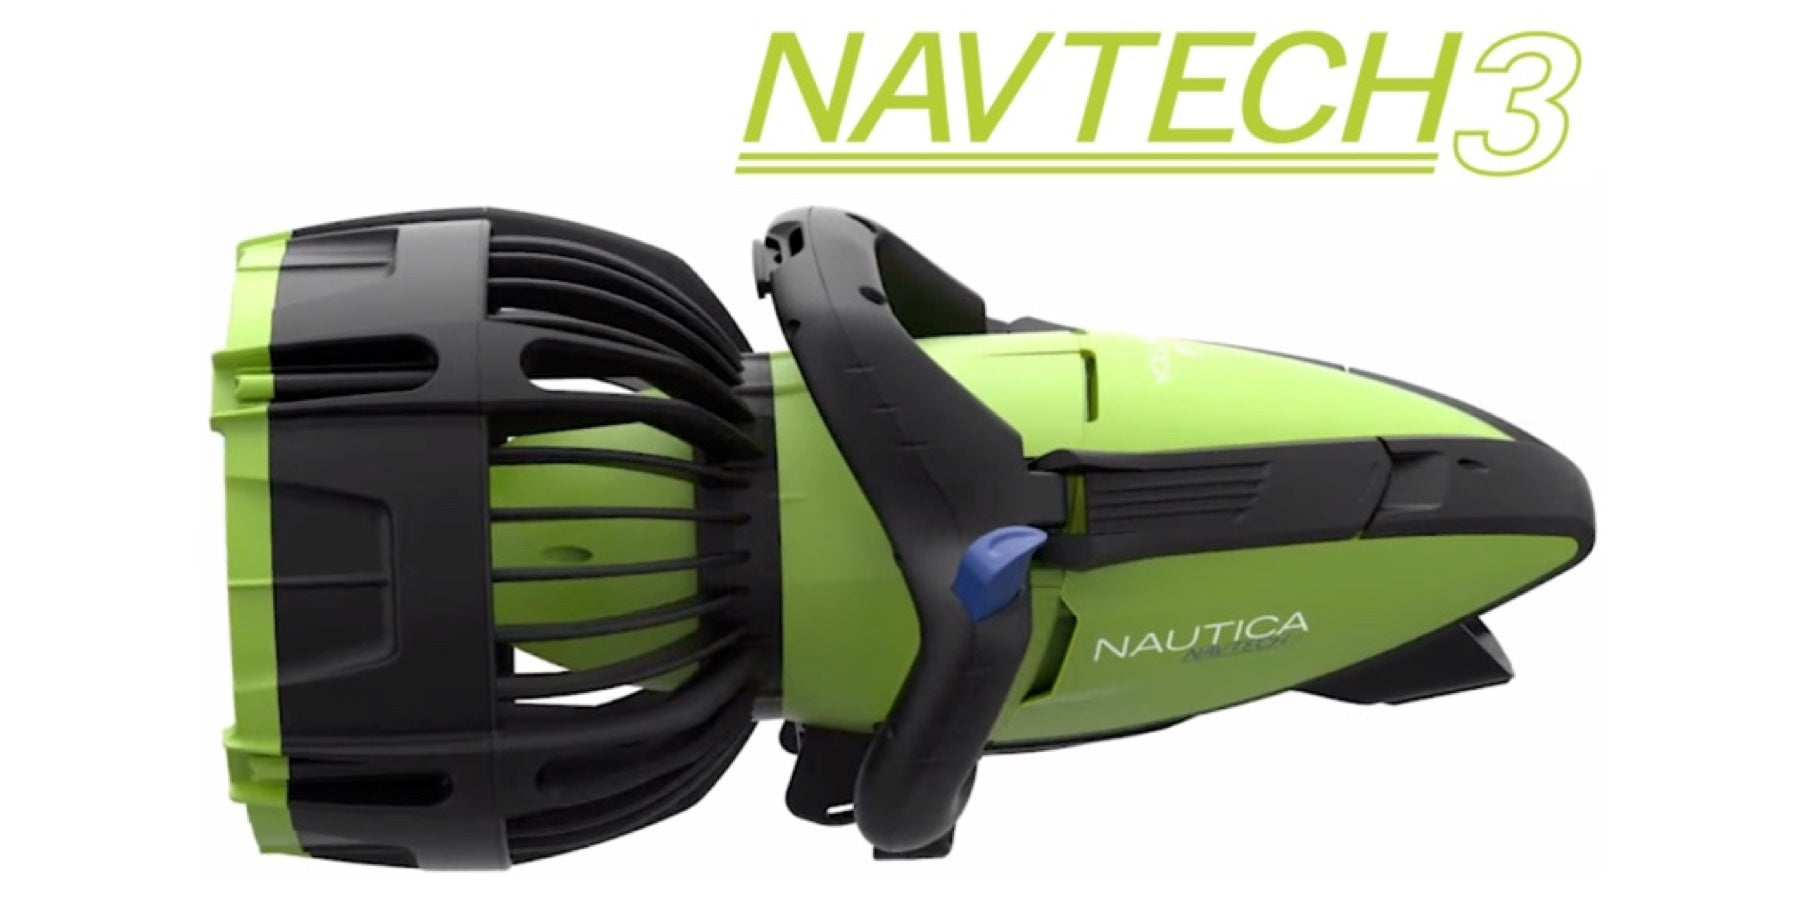 closeup of the Nautica Navtech 3 Seascooter for sale. It is lime green with black handles and highlights. The Nautica Sea Scooter logo is on the side.